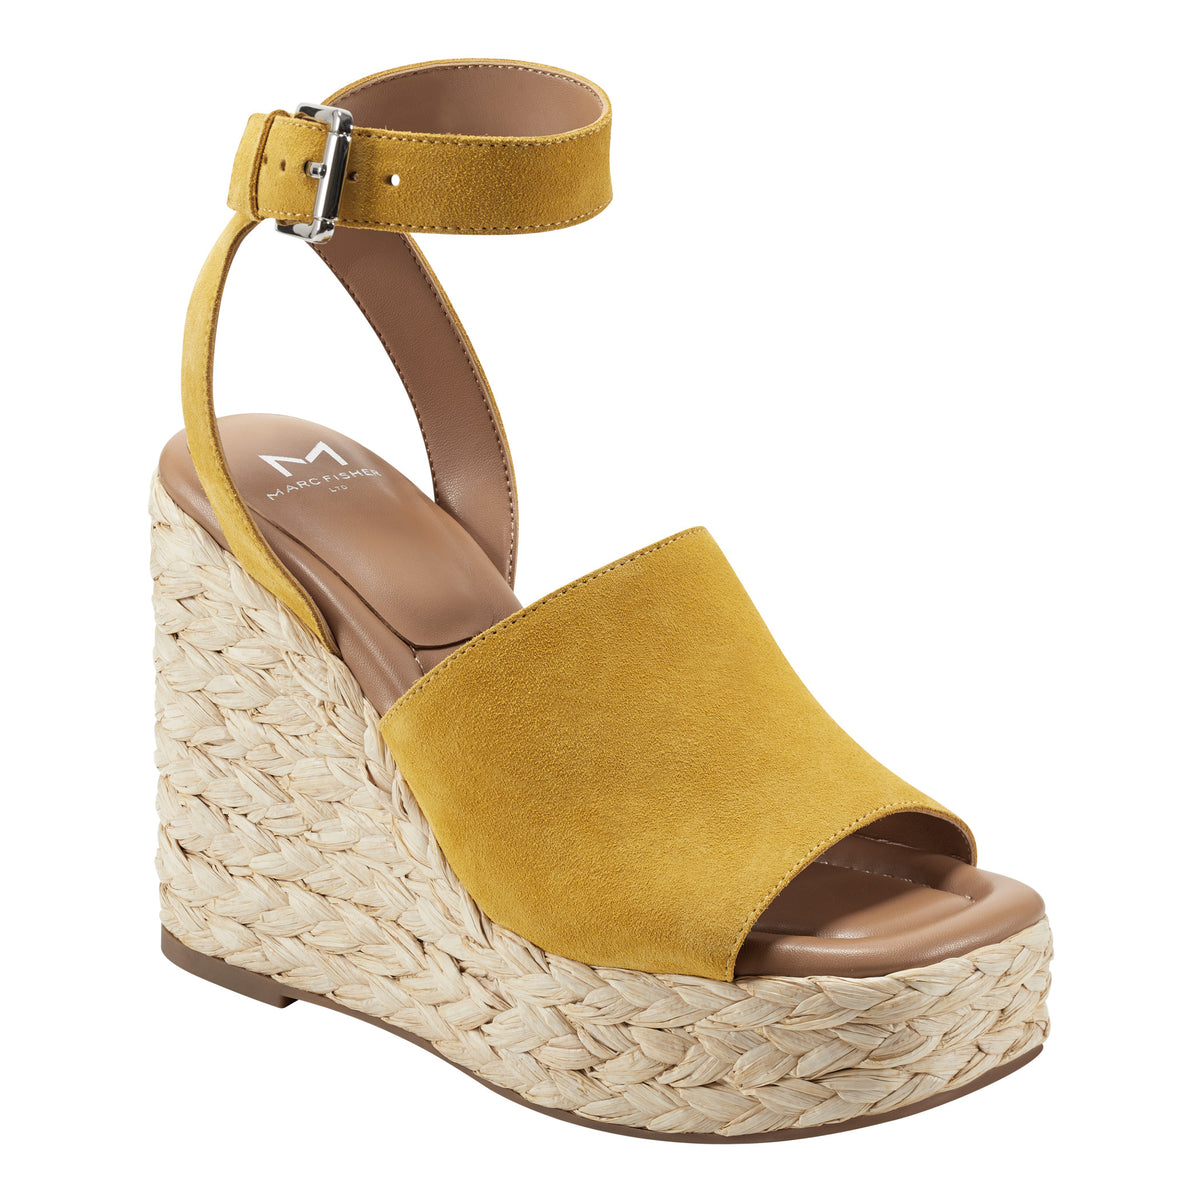 Nelly Espadrille Wedge Sandal